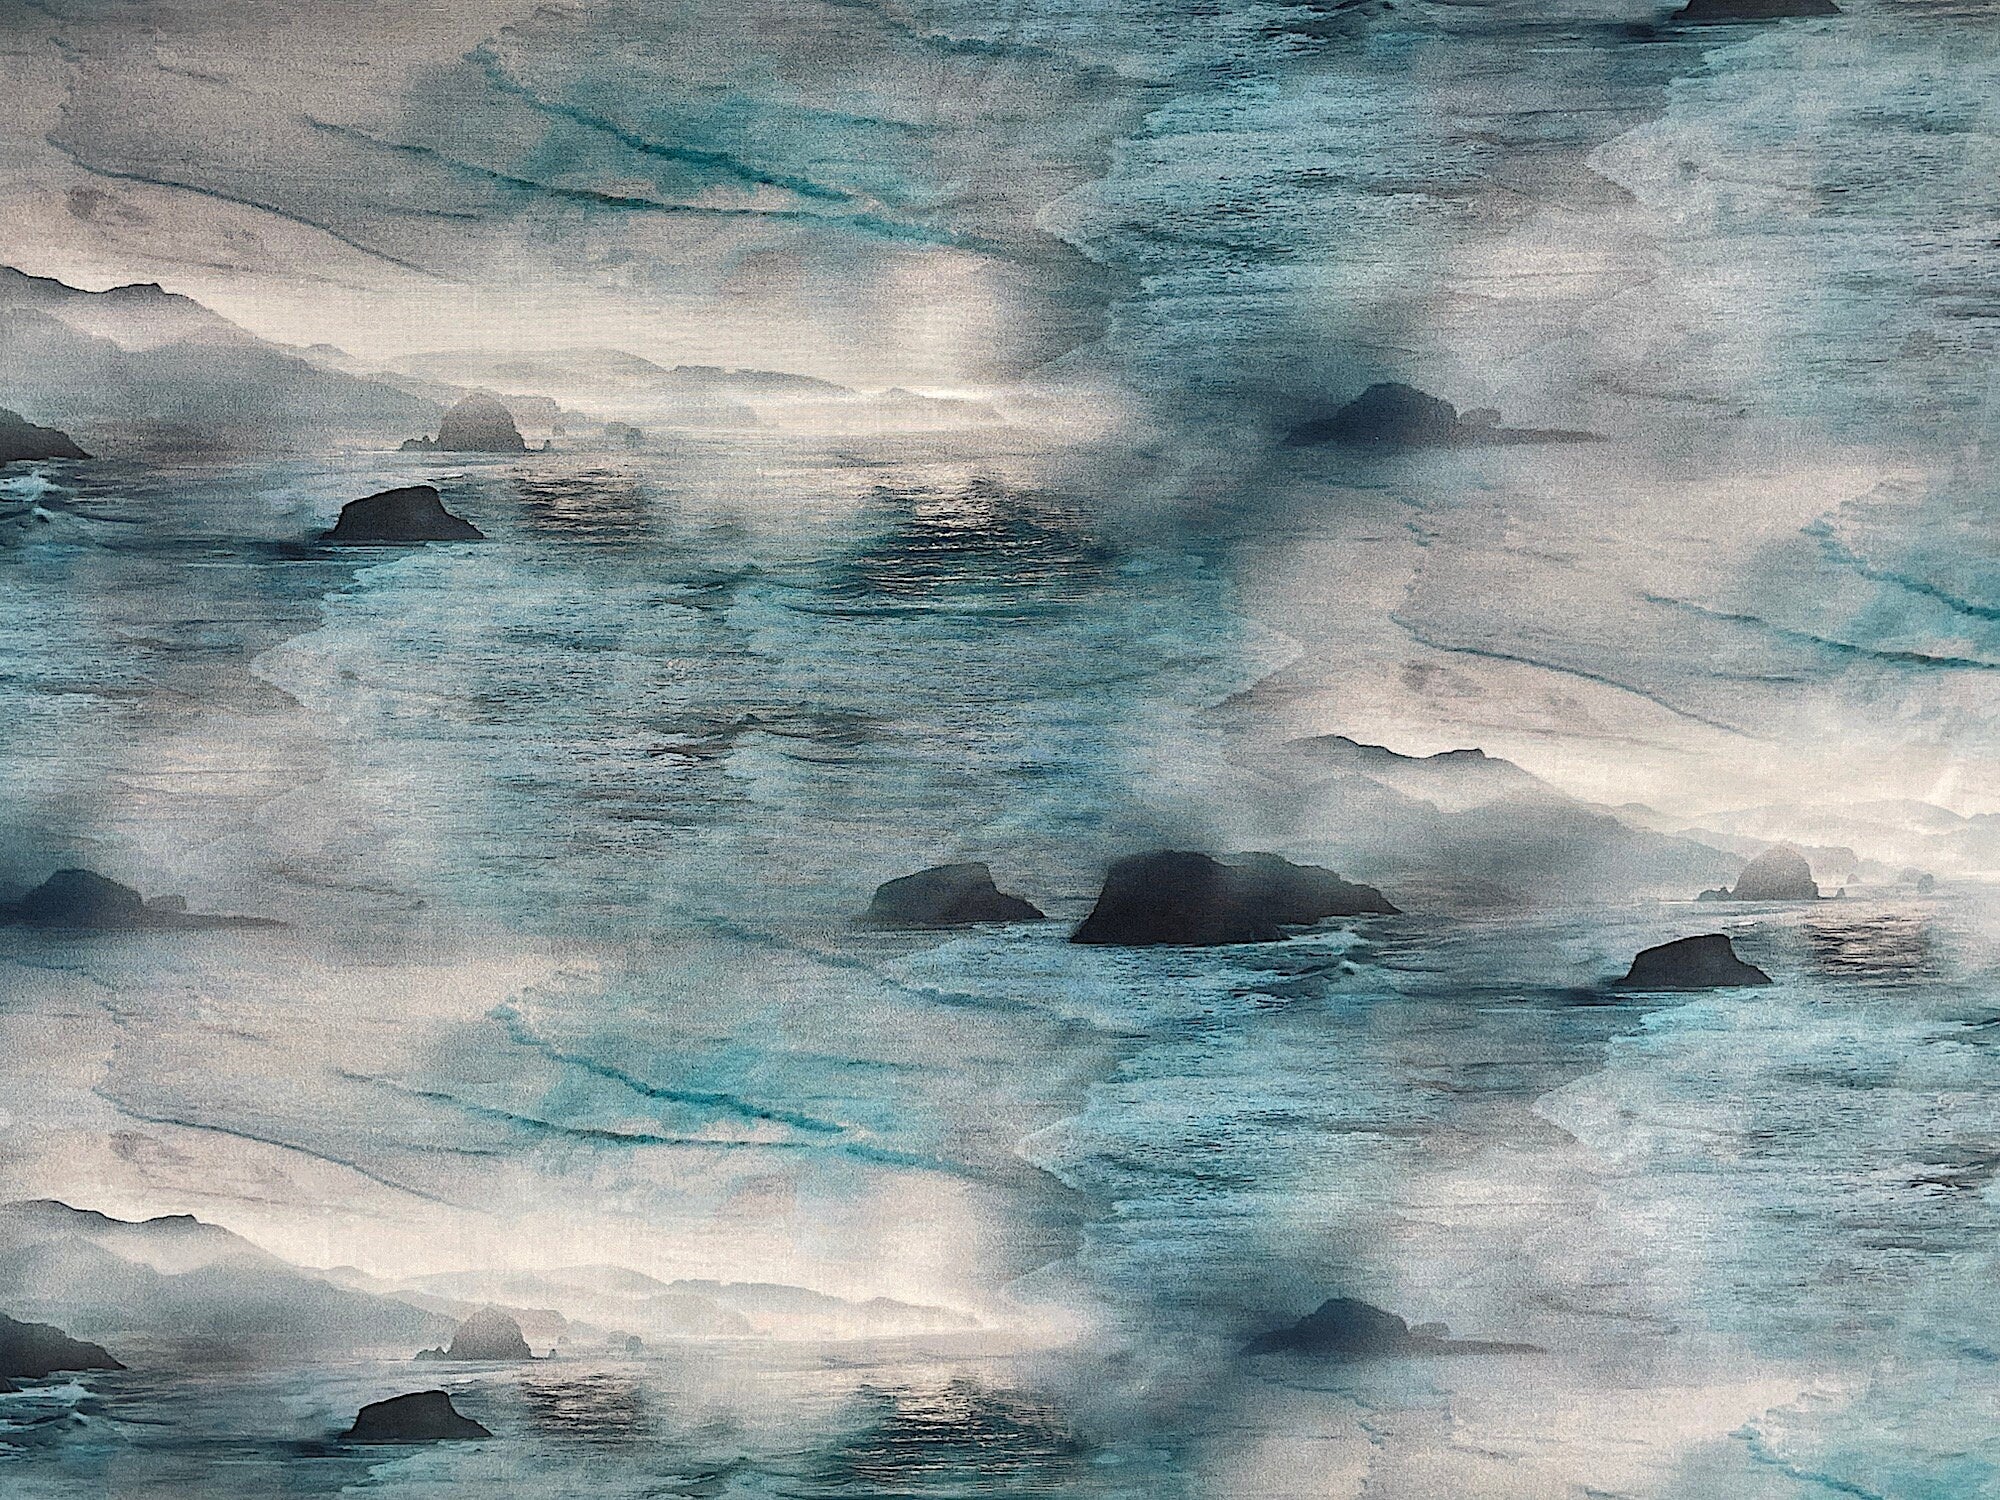 This fabric is called Sea Salt Focal Canon Beach Ocean. This fabric is like you are looking at the ocean as its covered with large rocks, mountains, water and waves. You will find shades of teal, blue and white along with black rocks.